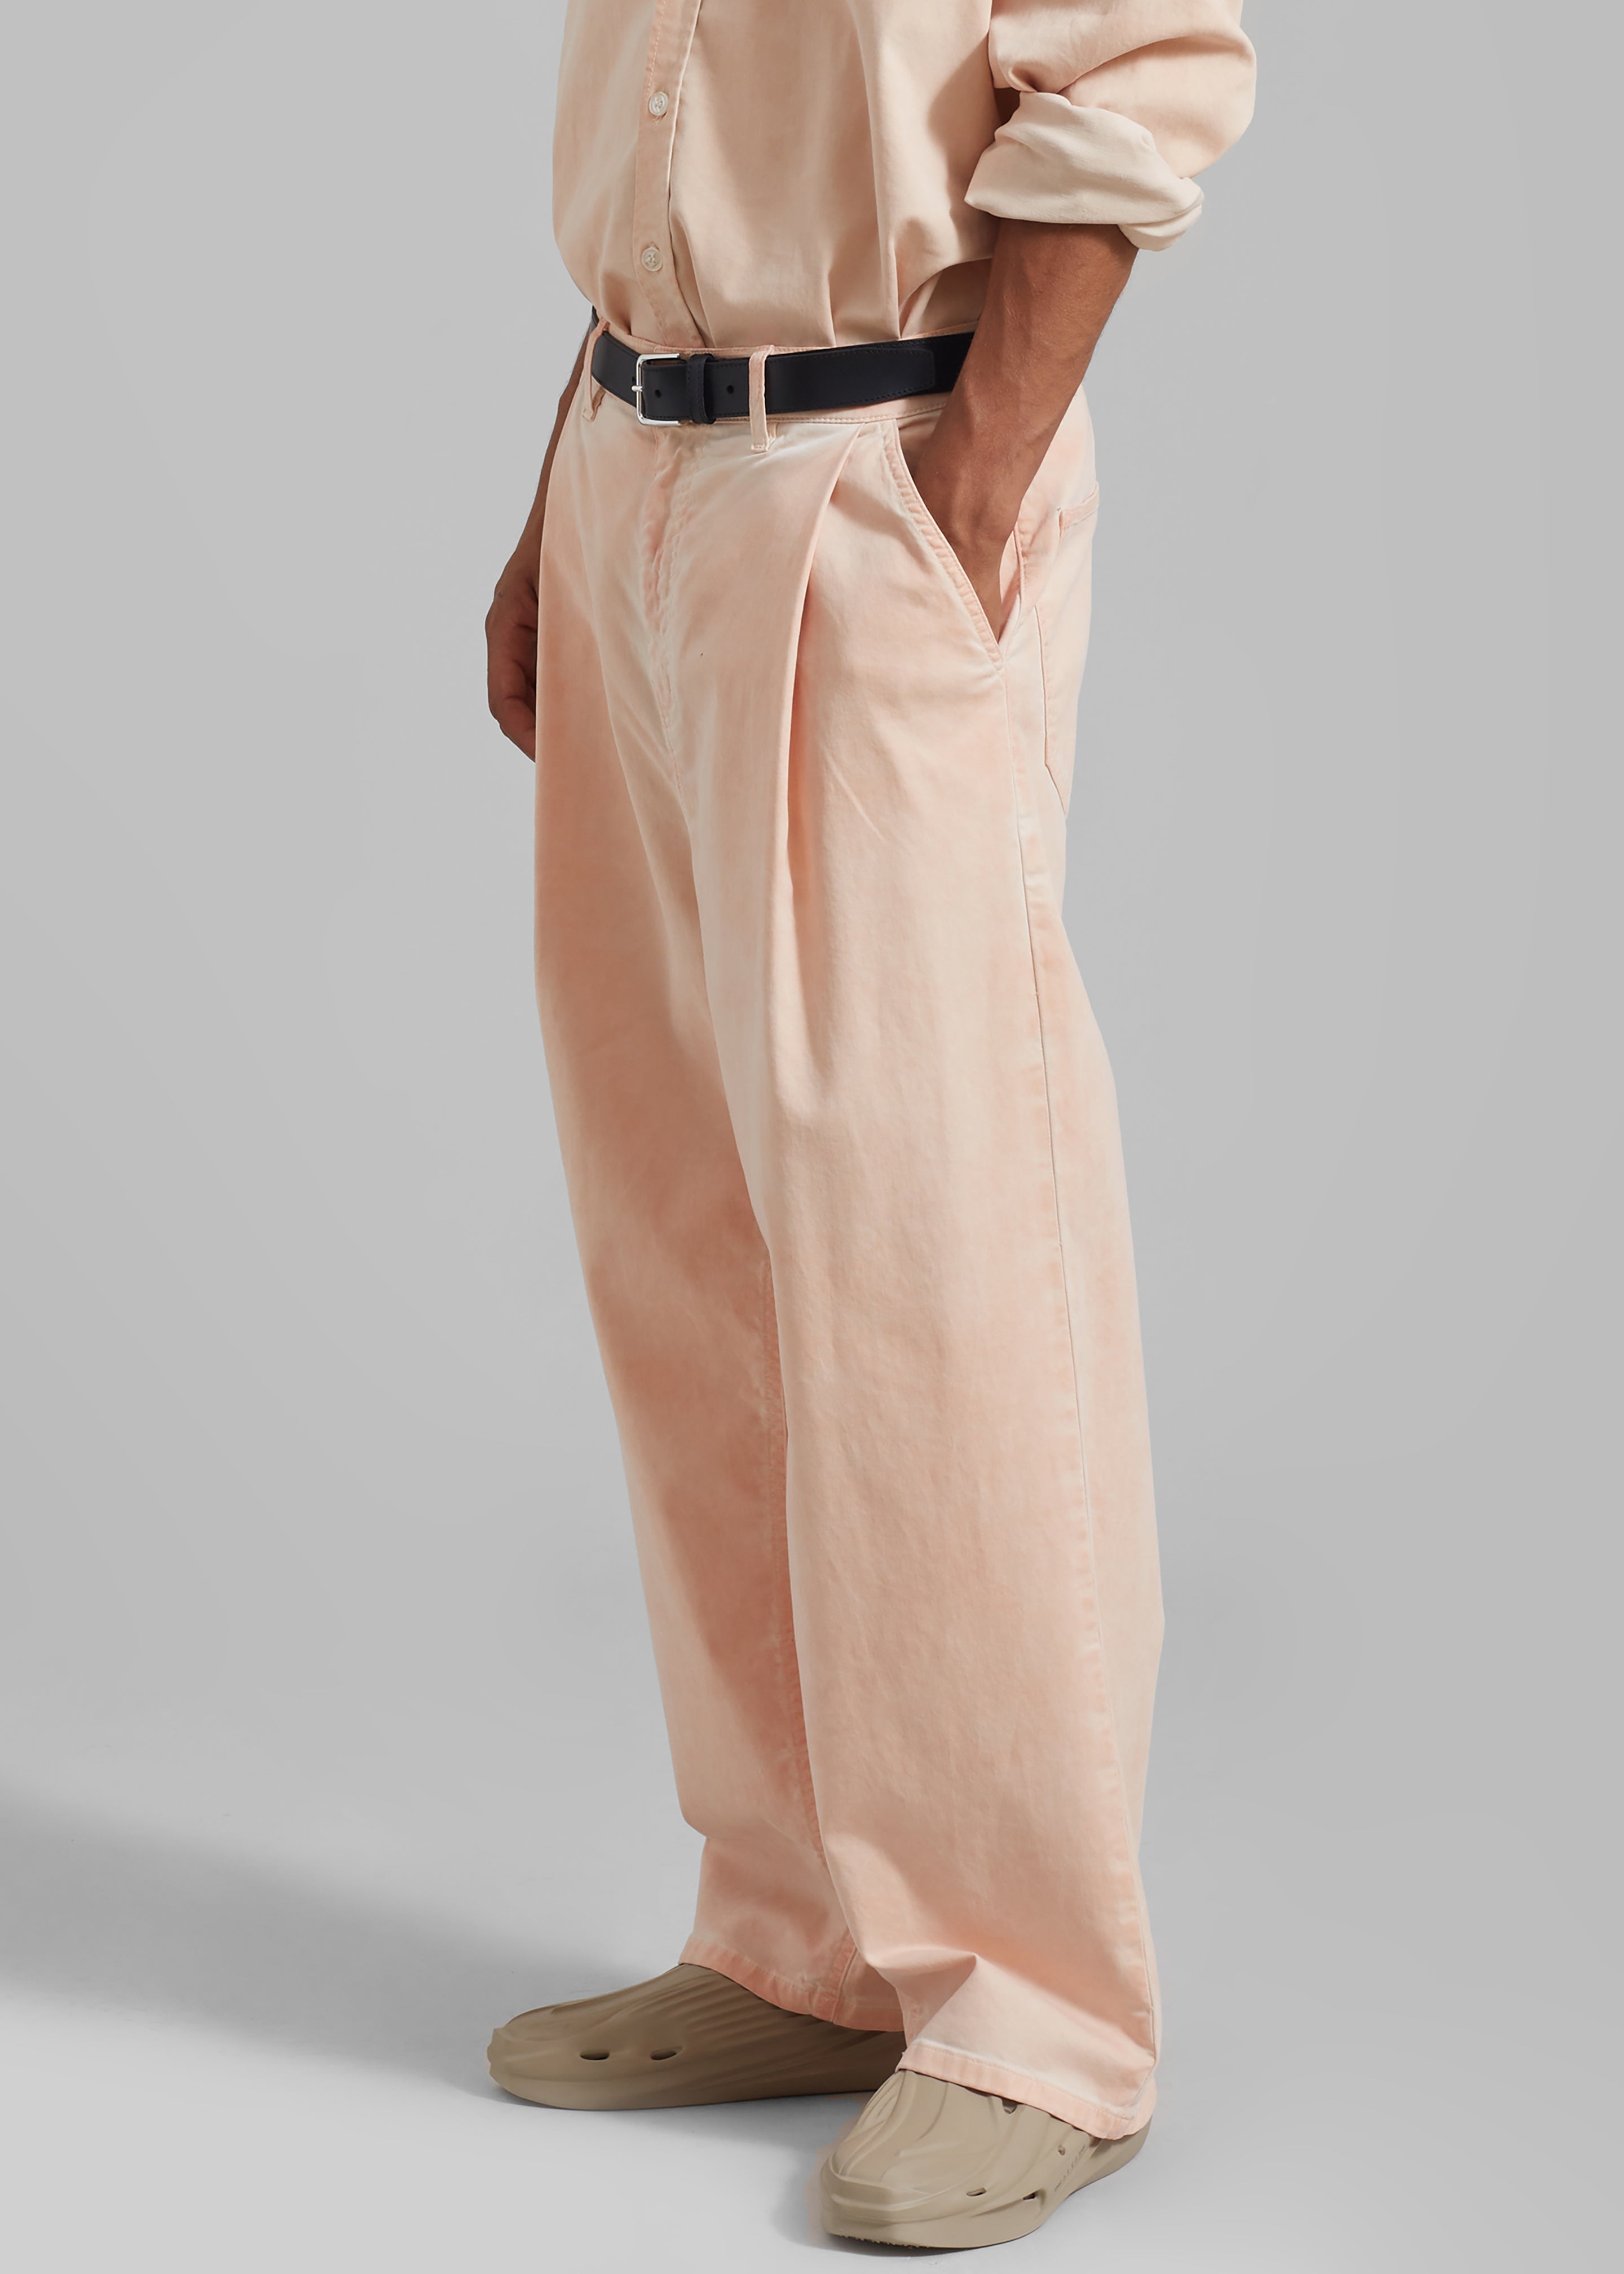 Drew Pants - Faded Pink - 2